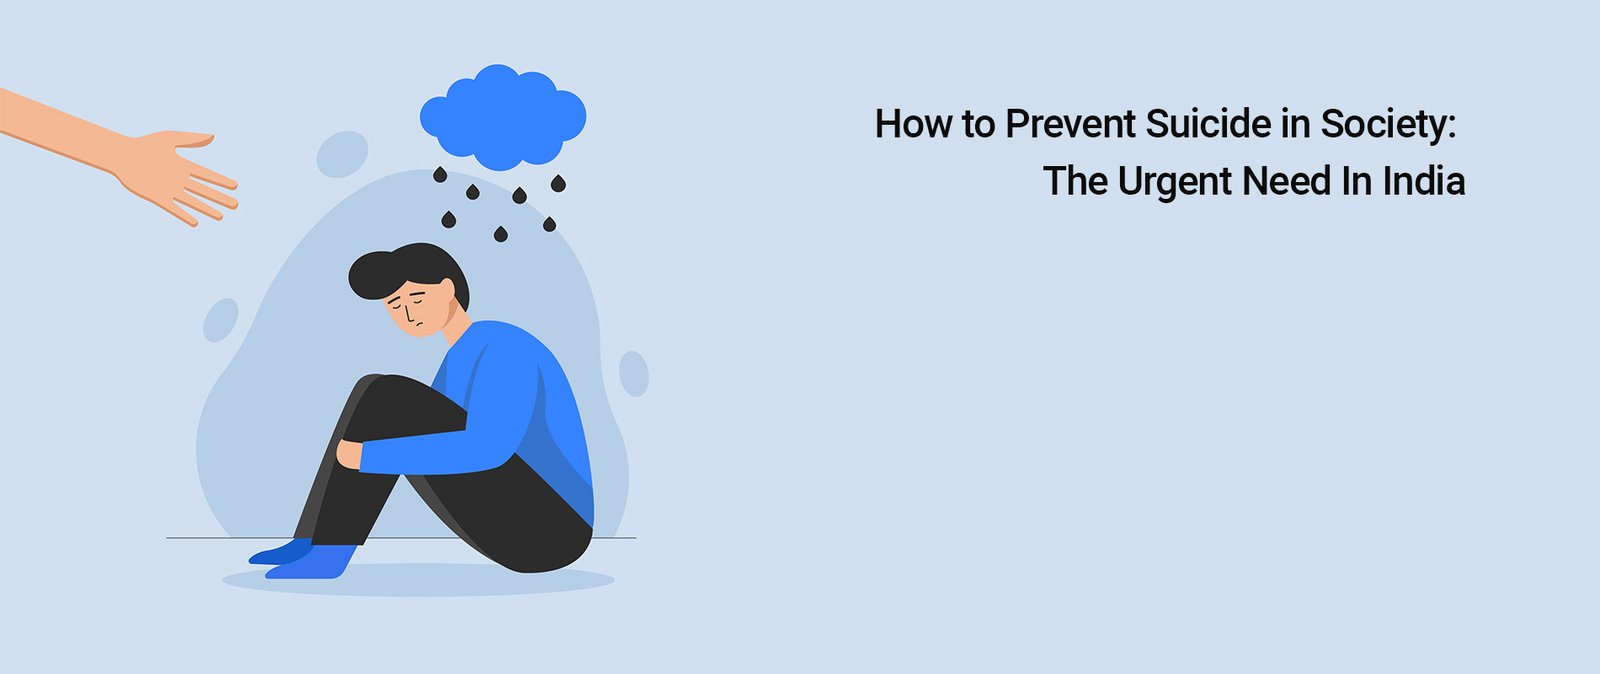 How to Prevent Suicide in Society